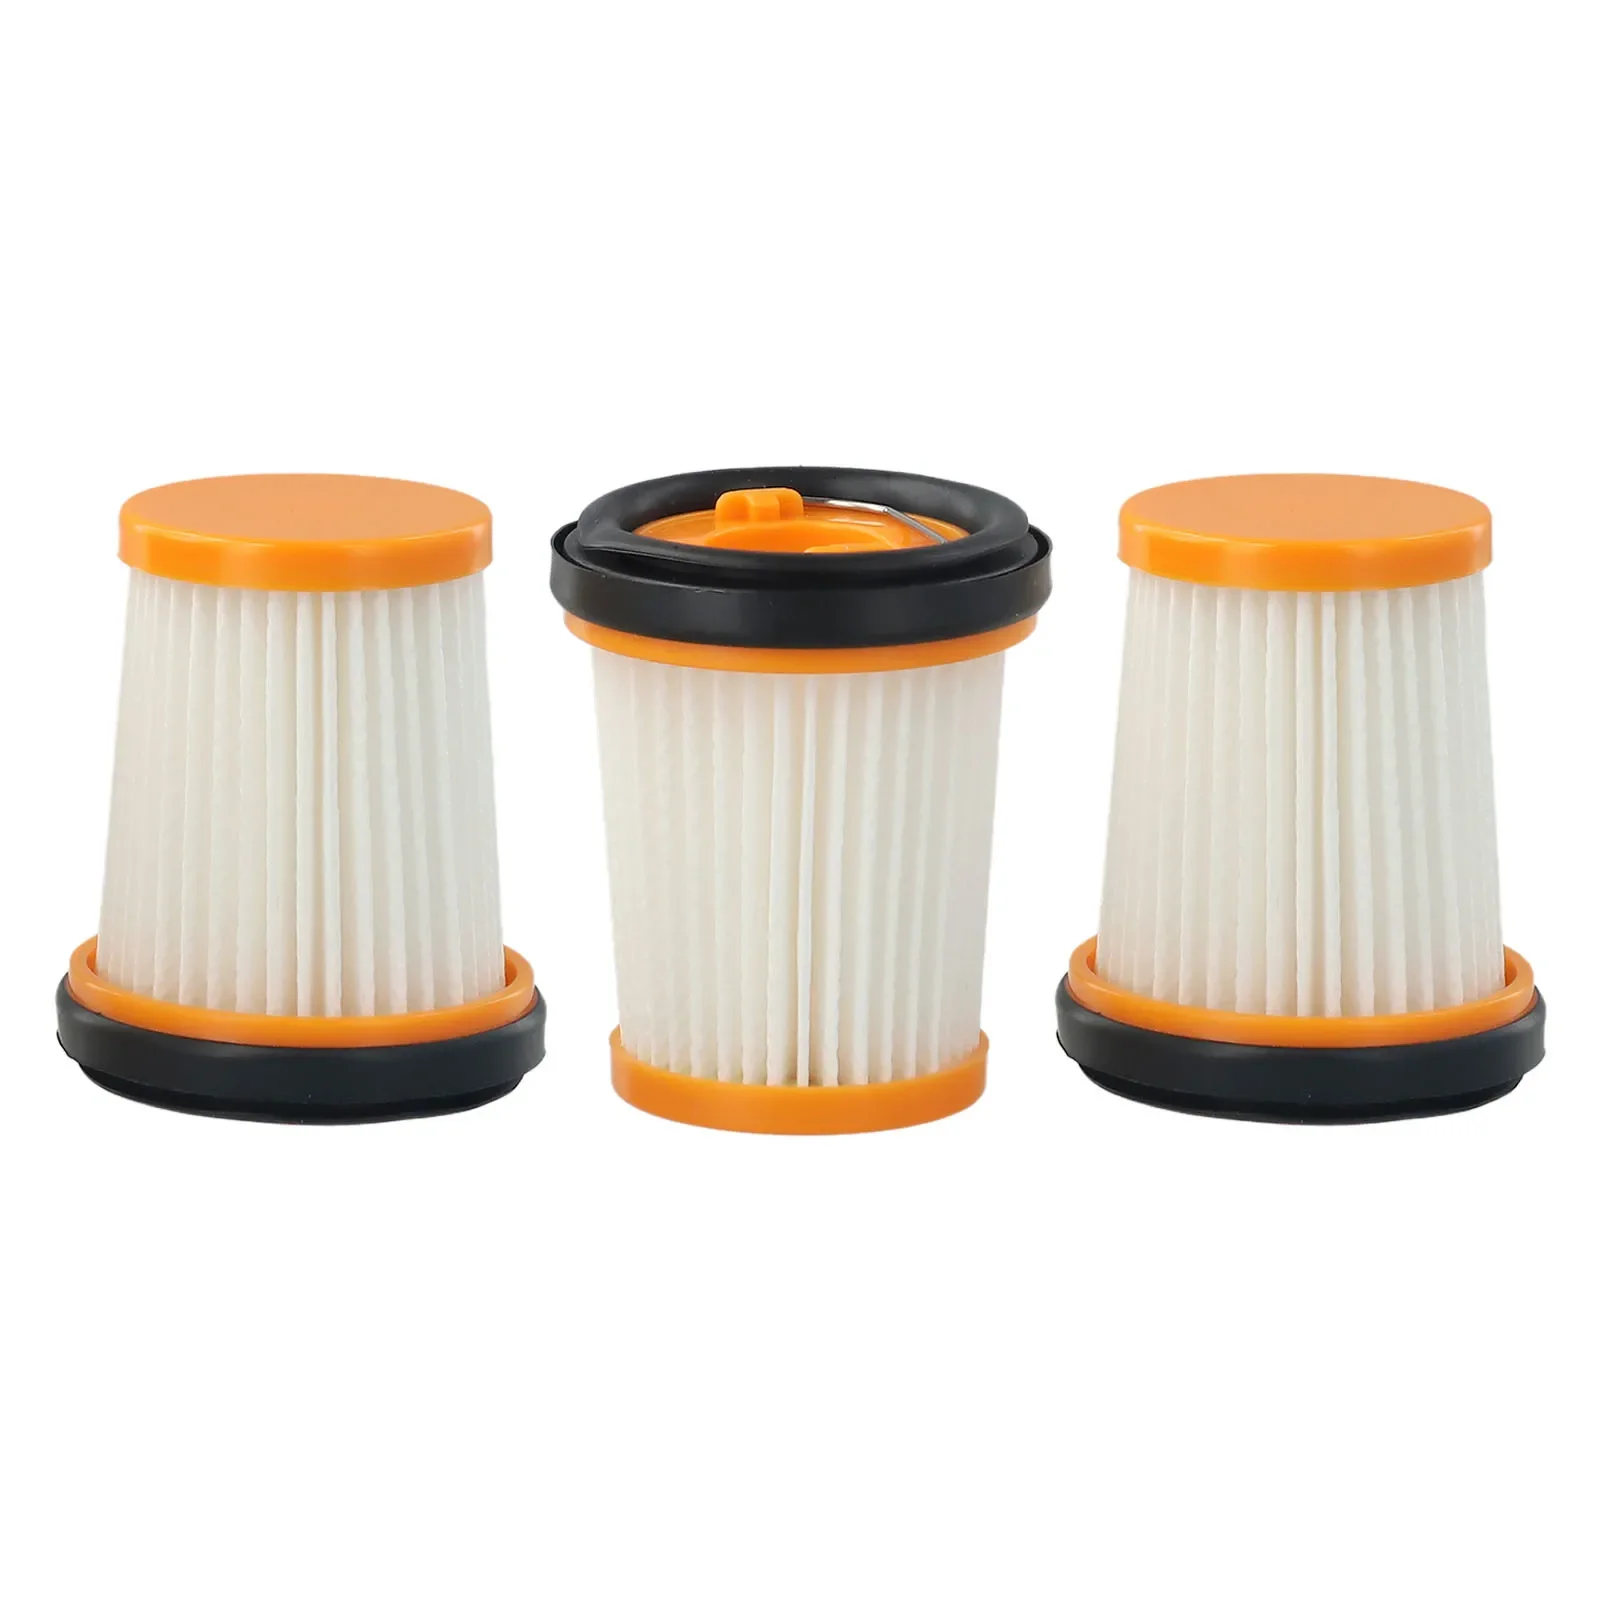 

3 X Filters For Shark Handheld Vacuum Cleaner Cordless Vacuum Cleaner WV200EU / WV251EU Sweeper Cleaning Tool Filter Replacement